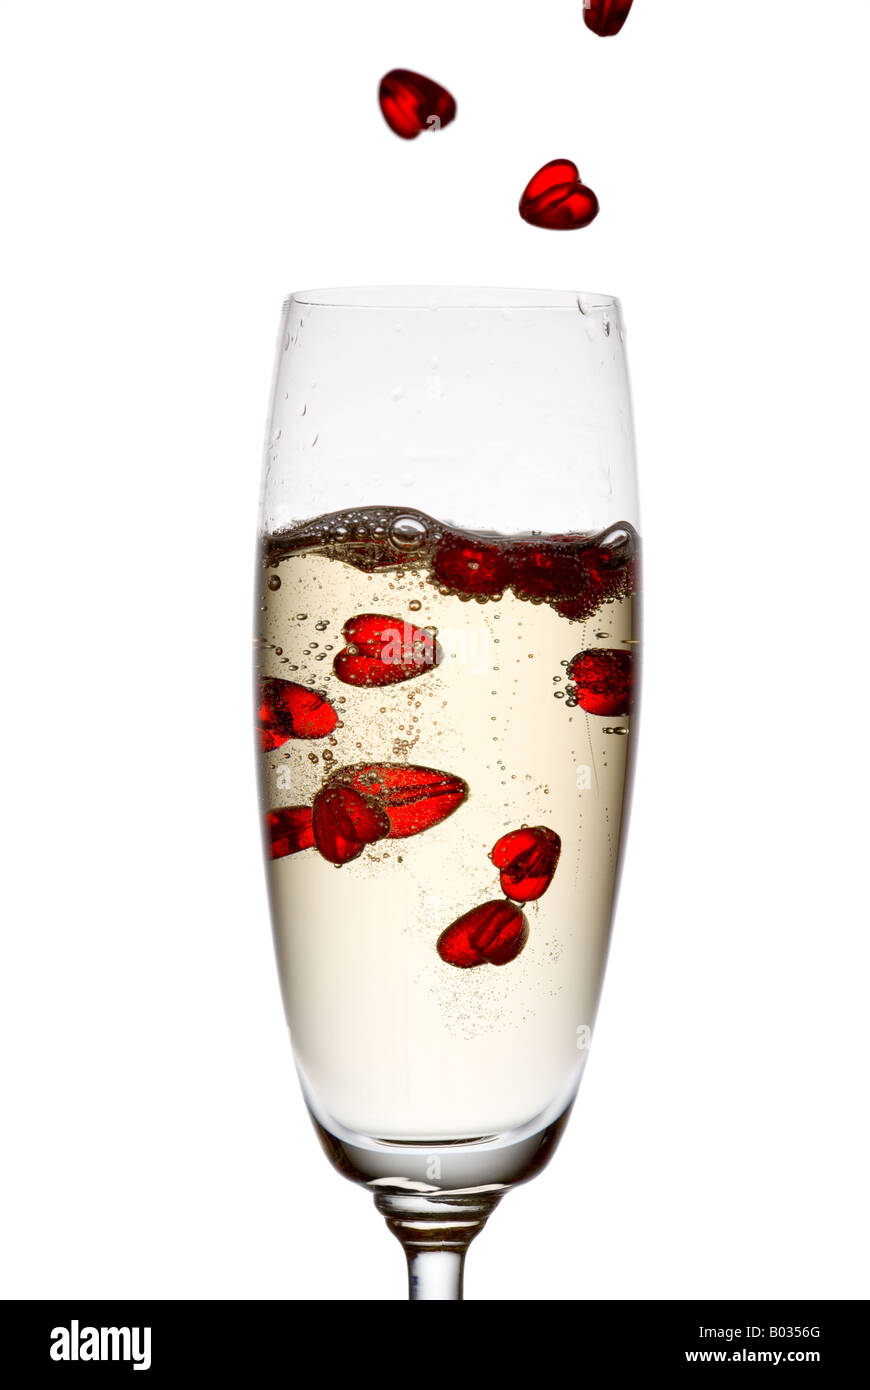 Hearts falling down into champagne flute. Stock Photo